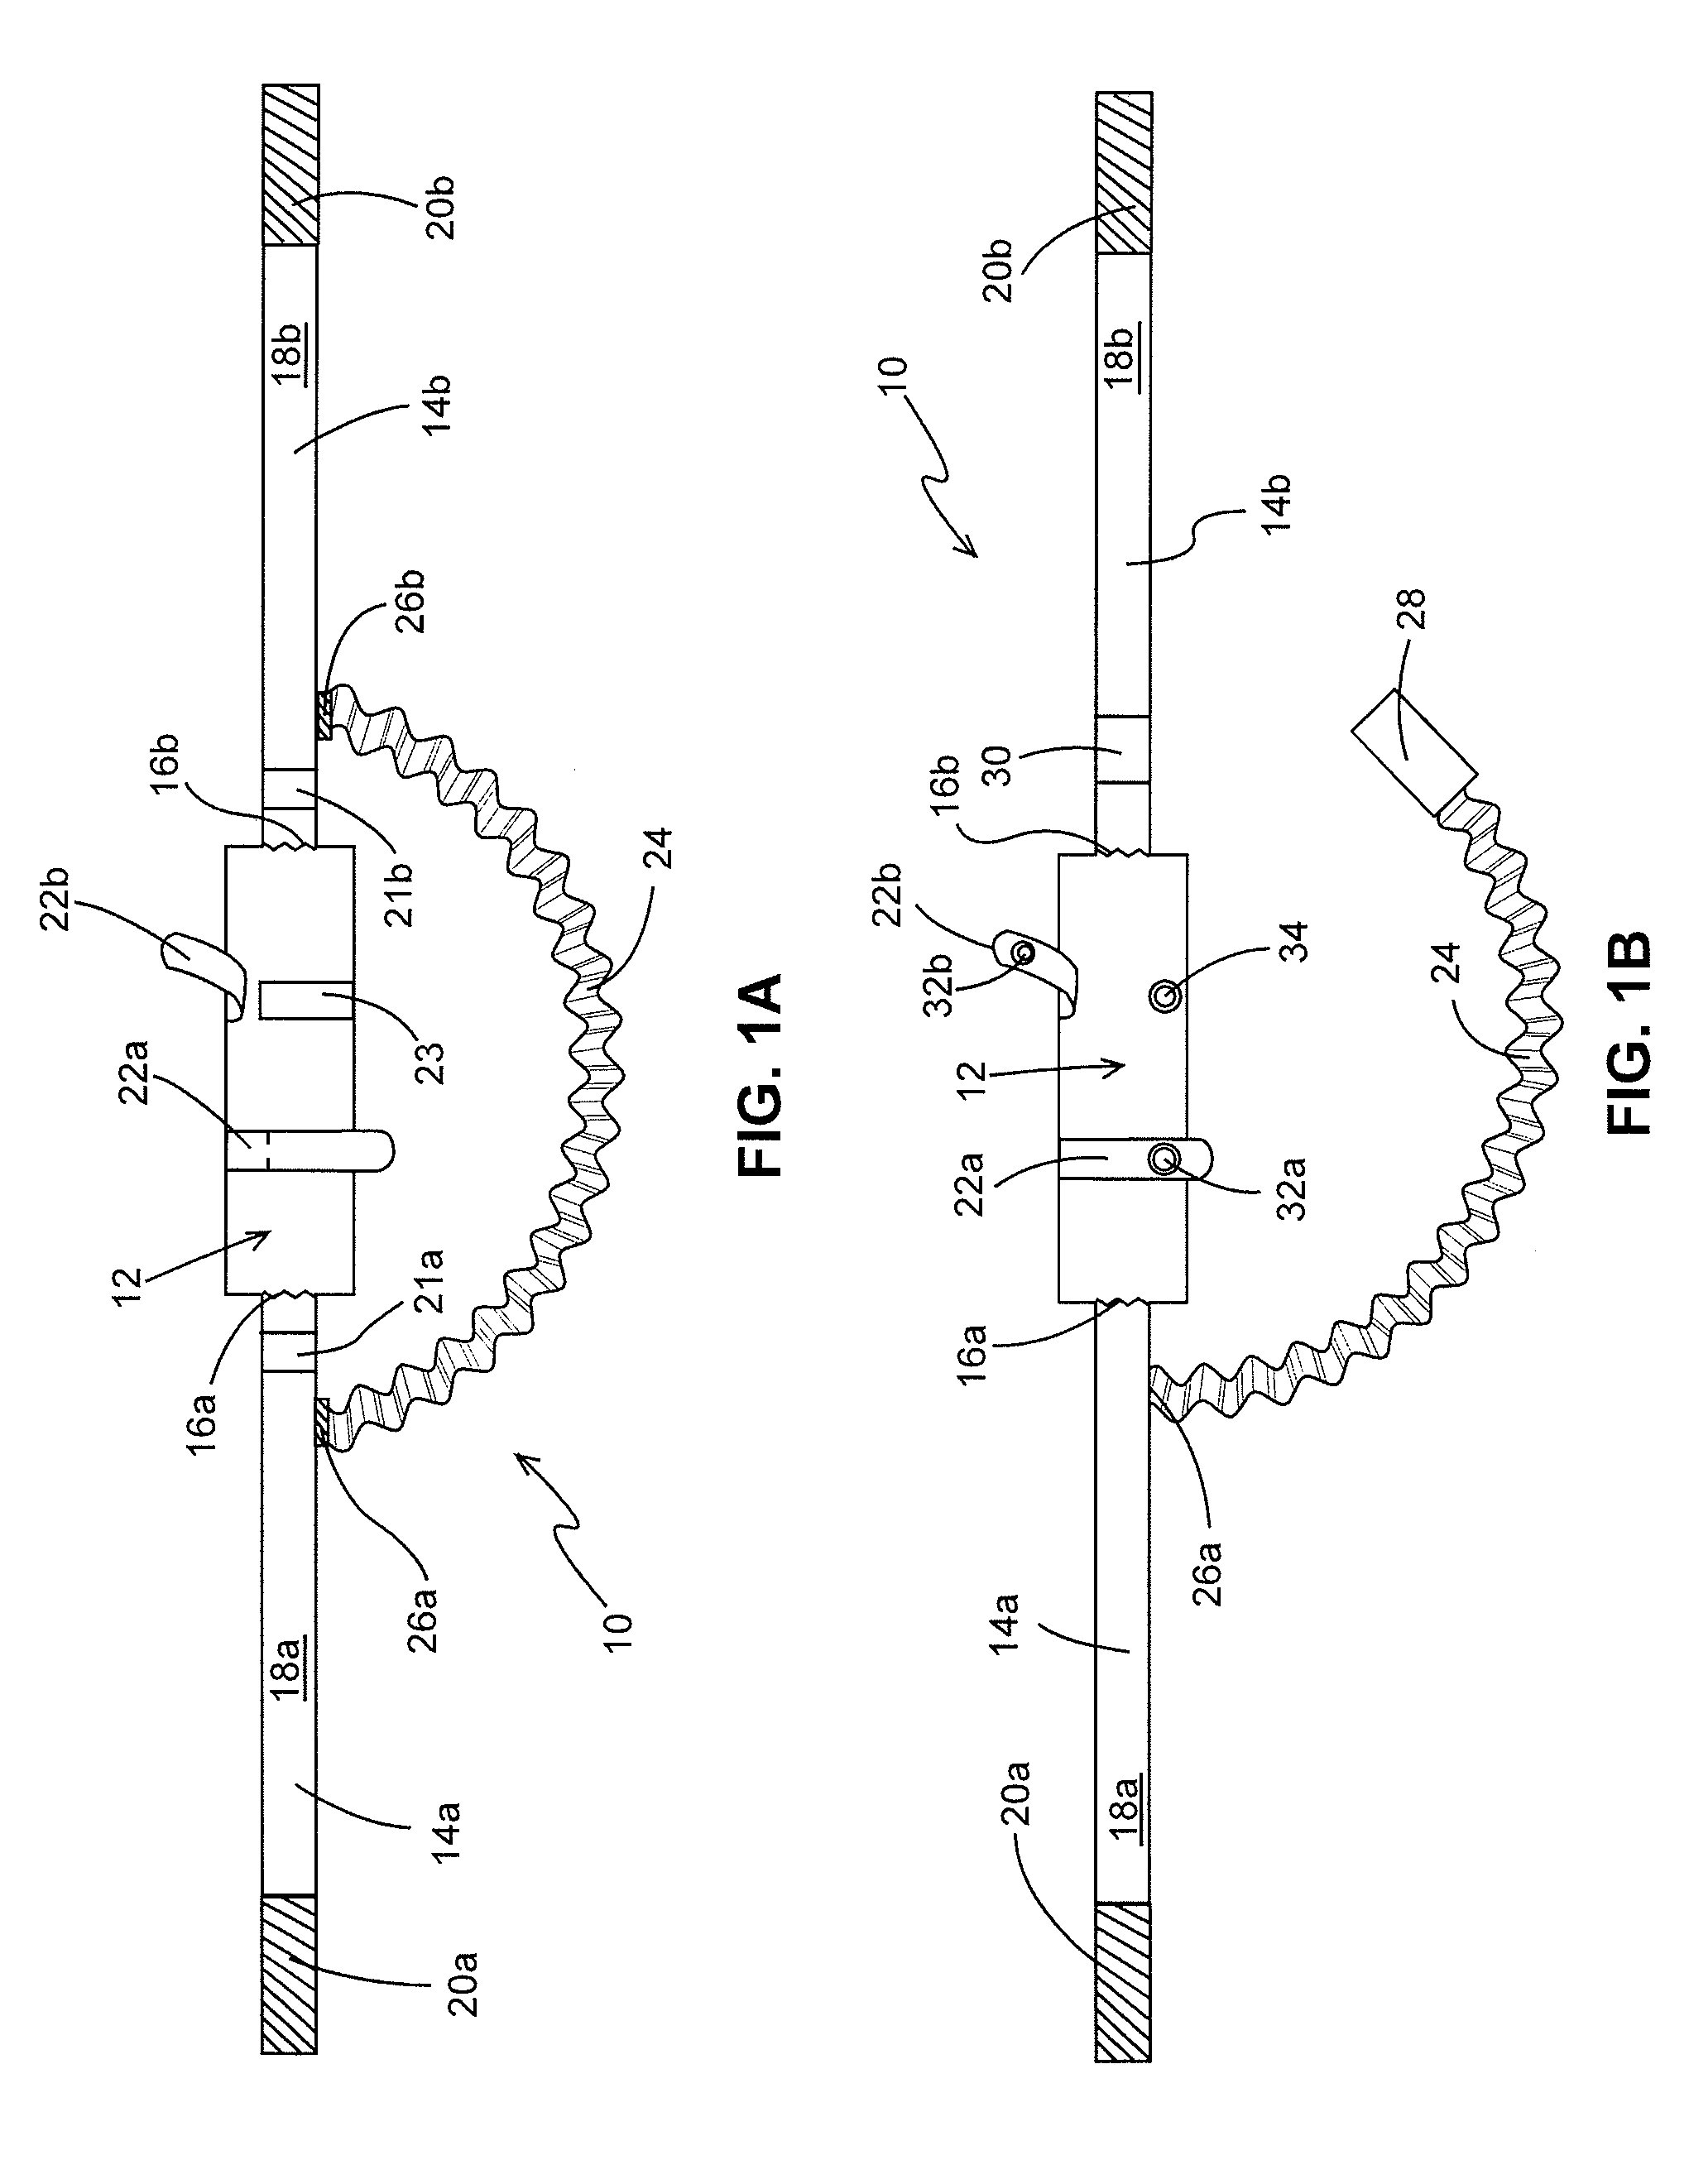 Apparatus for positioning a nasal cannula